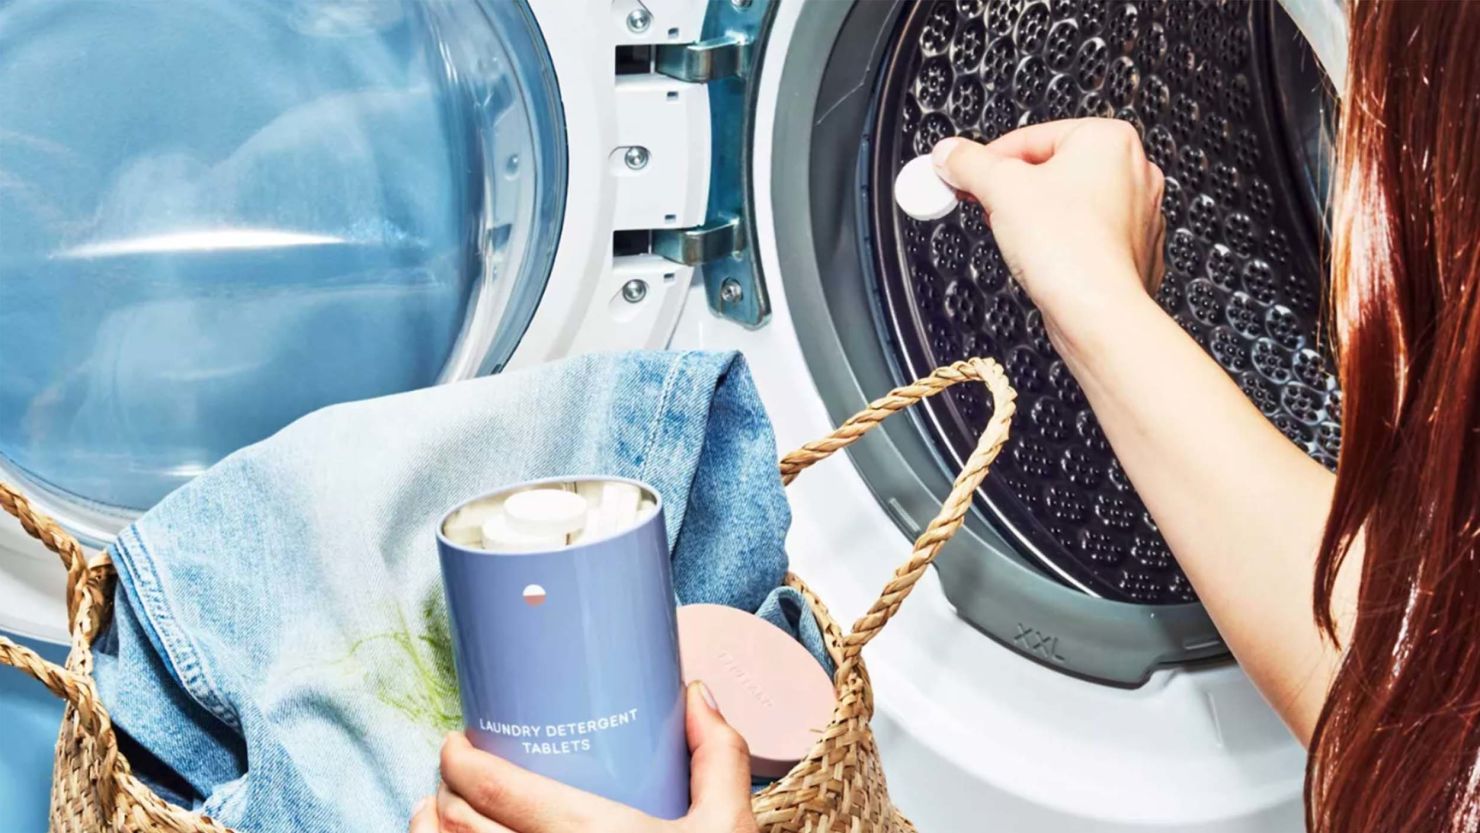 PORTABLE CLOTHES DRYER - Grey Technologies